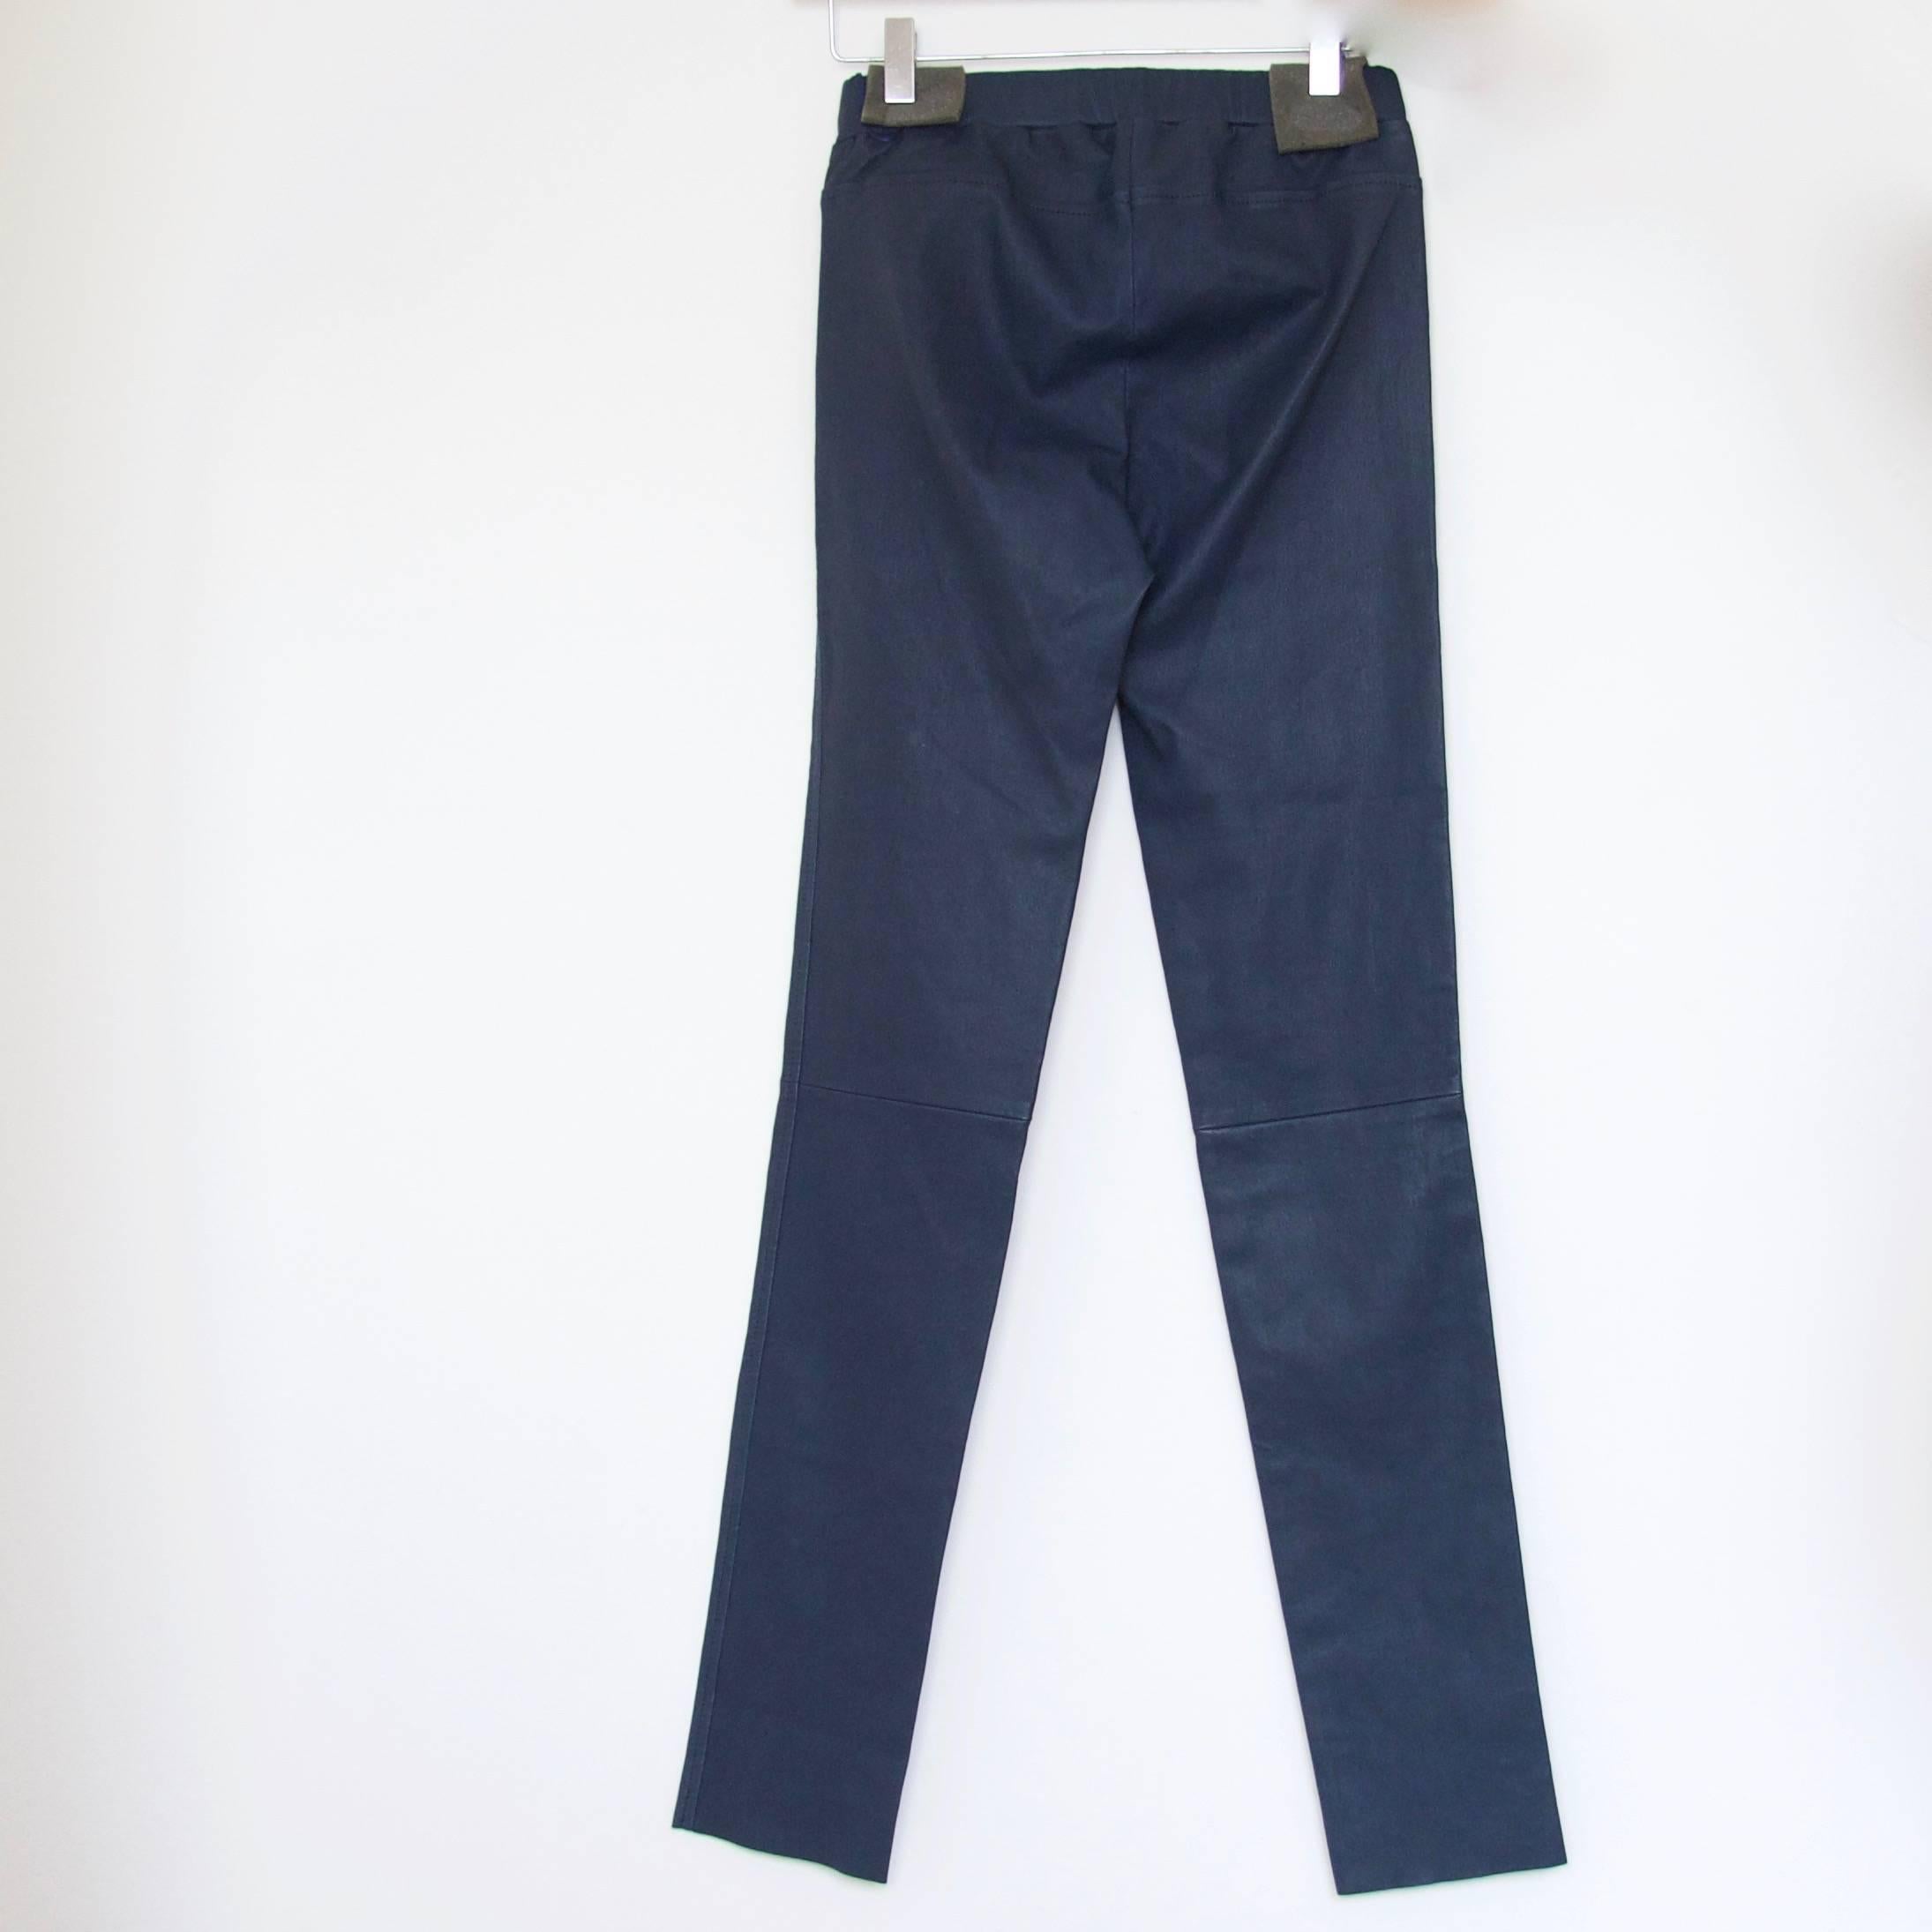 Super fit leather skinny trackis 
Made in France

Air Force Blue